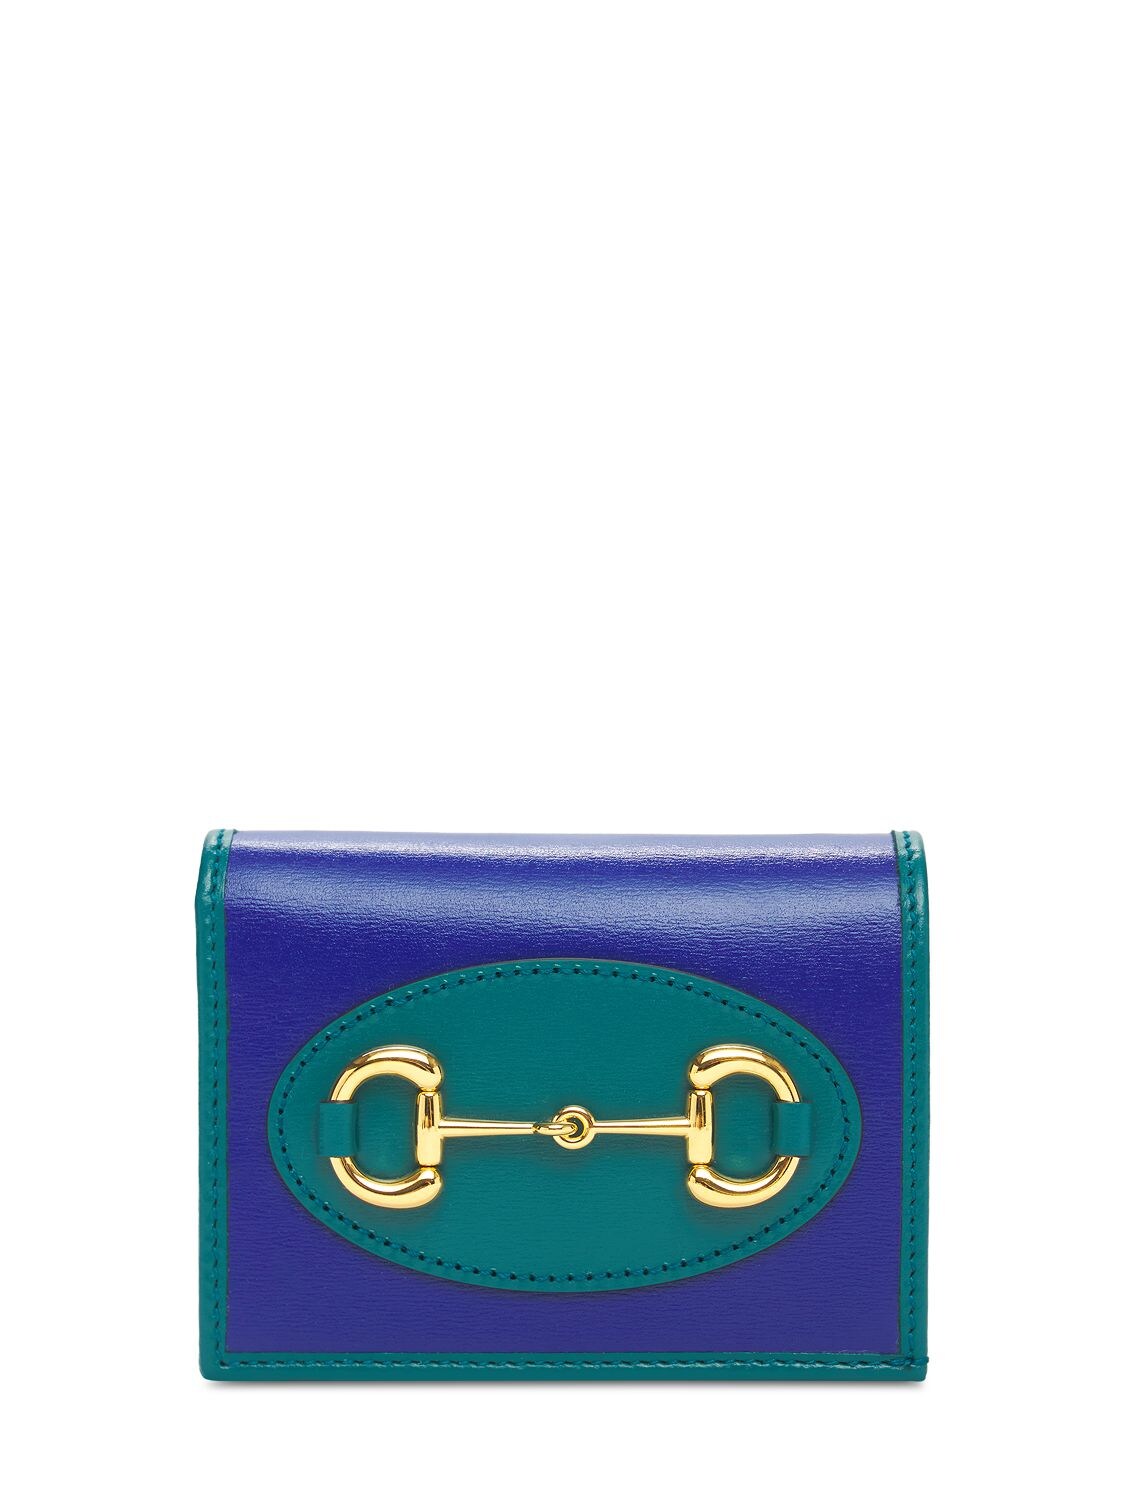 Gucci 1955 Horsebit Card Case Leather Wallet In Imperial Blue